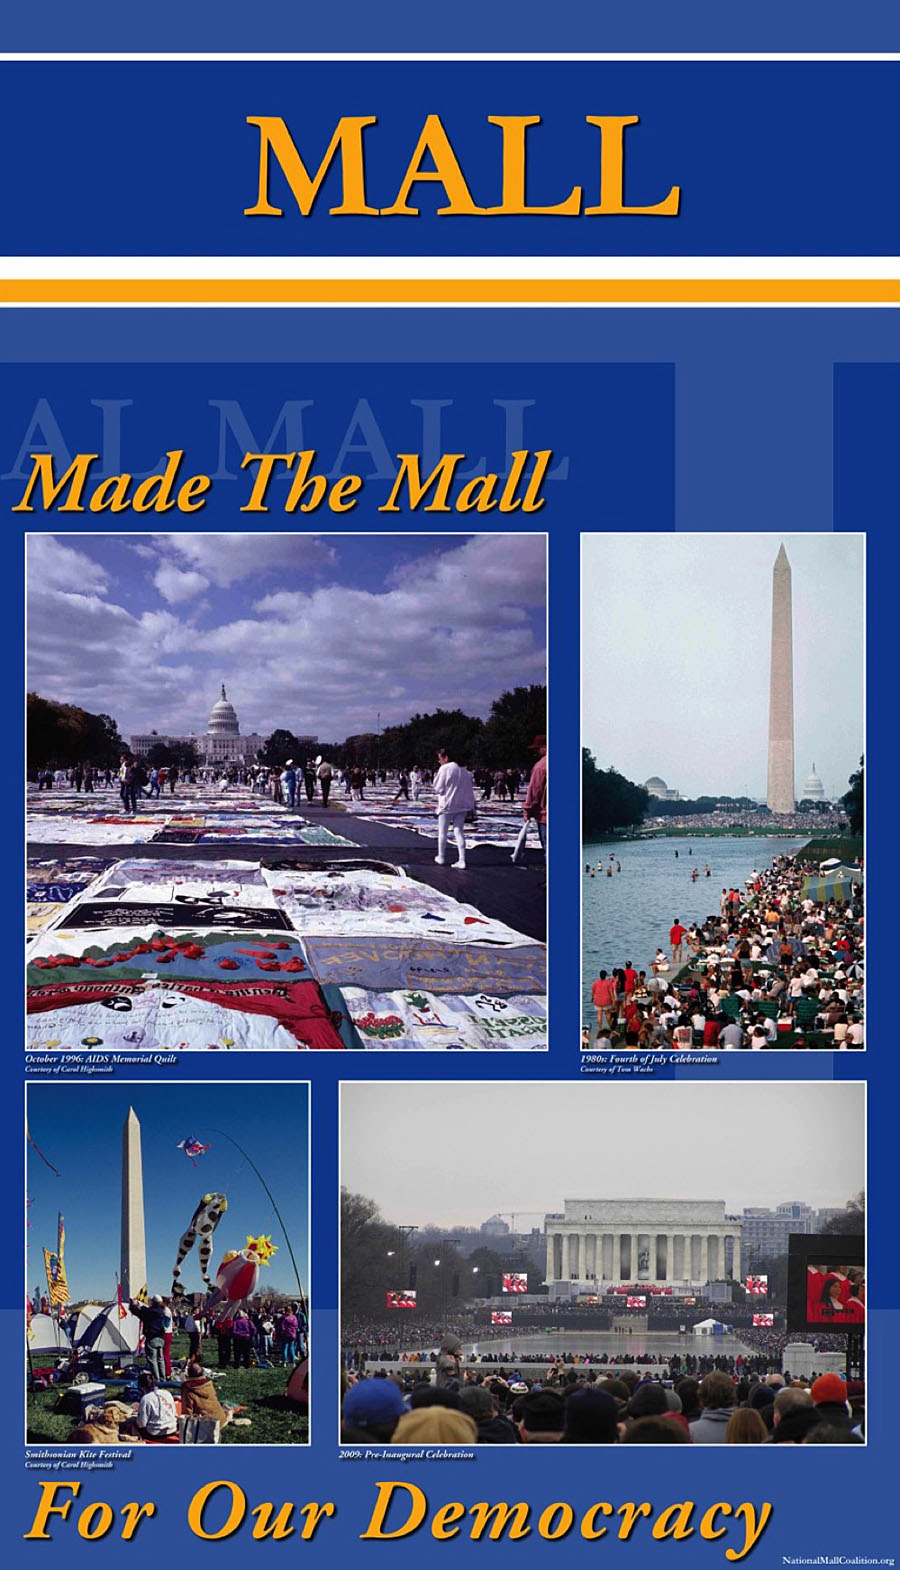 The National Mall: Stage For Democracy Exhibit at Reagan National Airport: Made the Mall ...